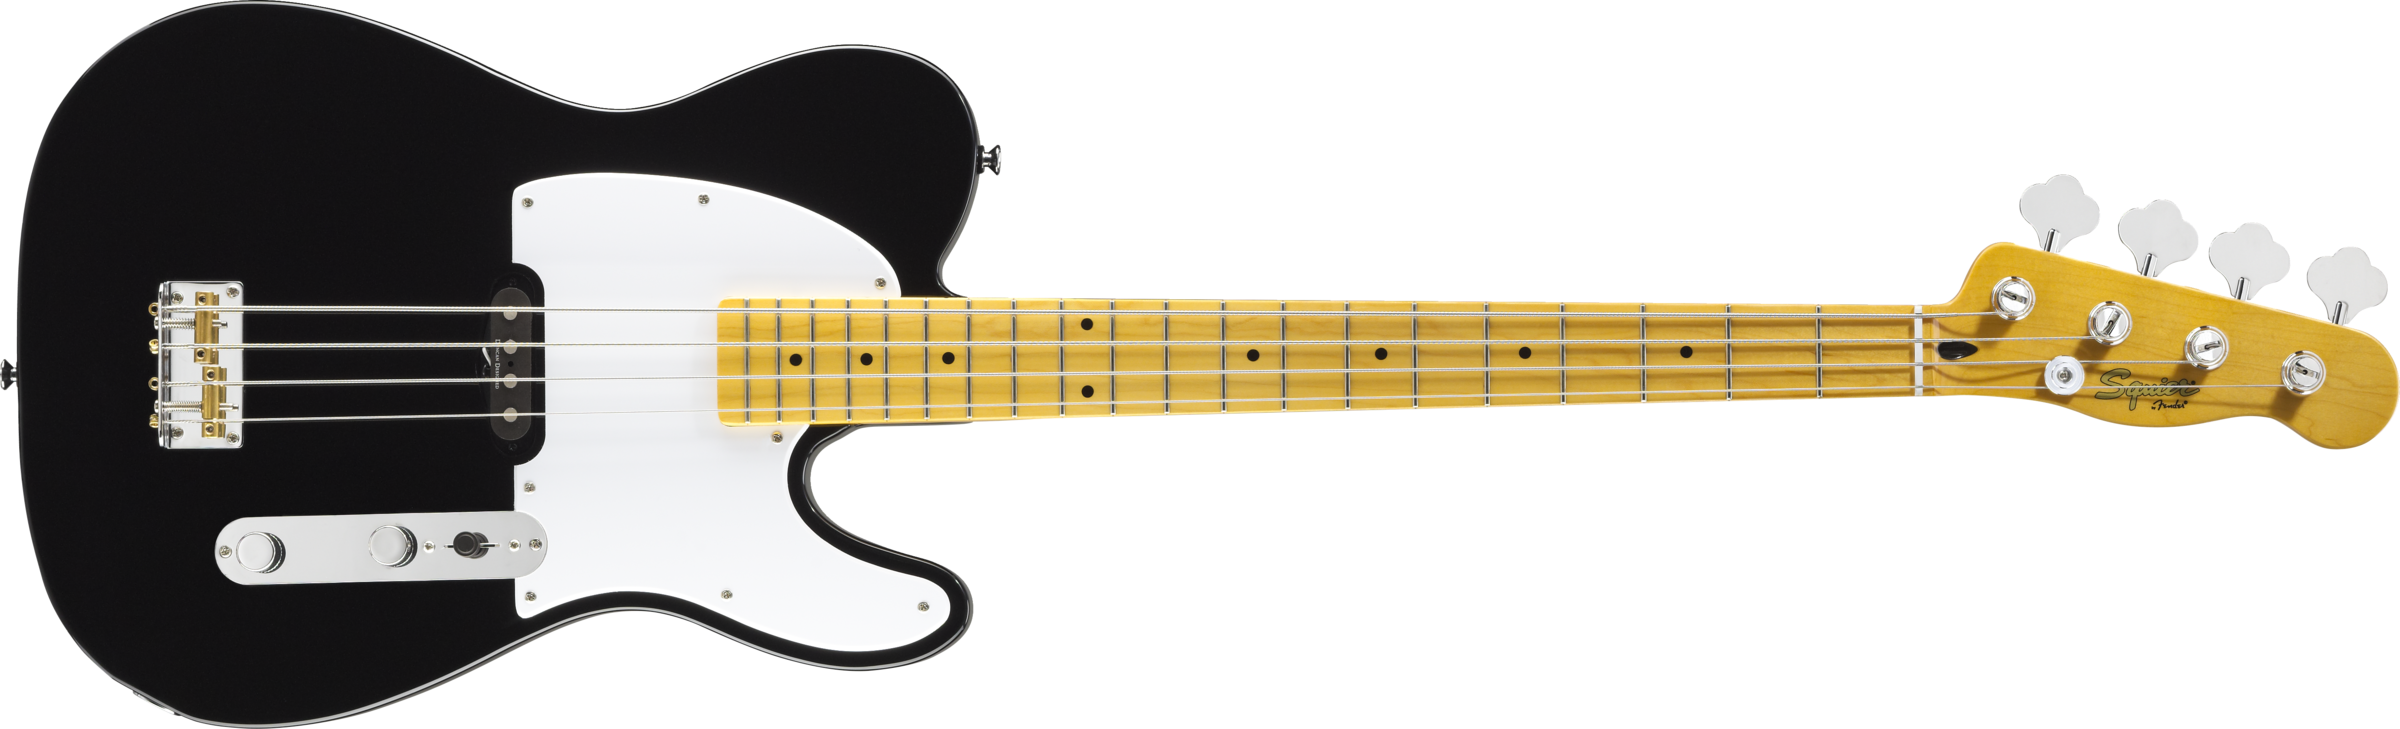 squier-vintage-modified-telecaster-bass-158918.png